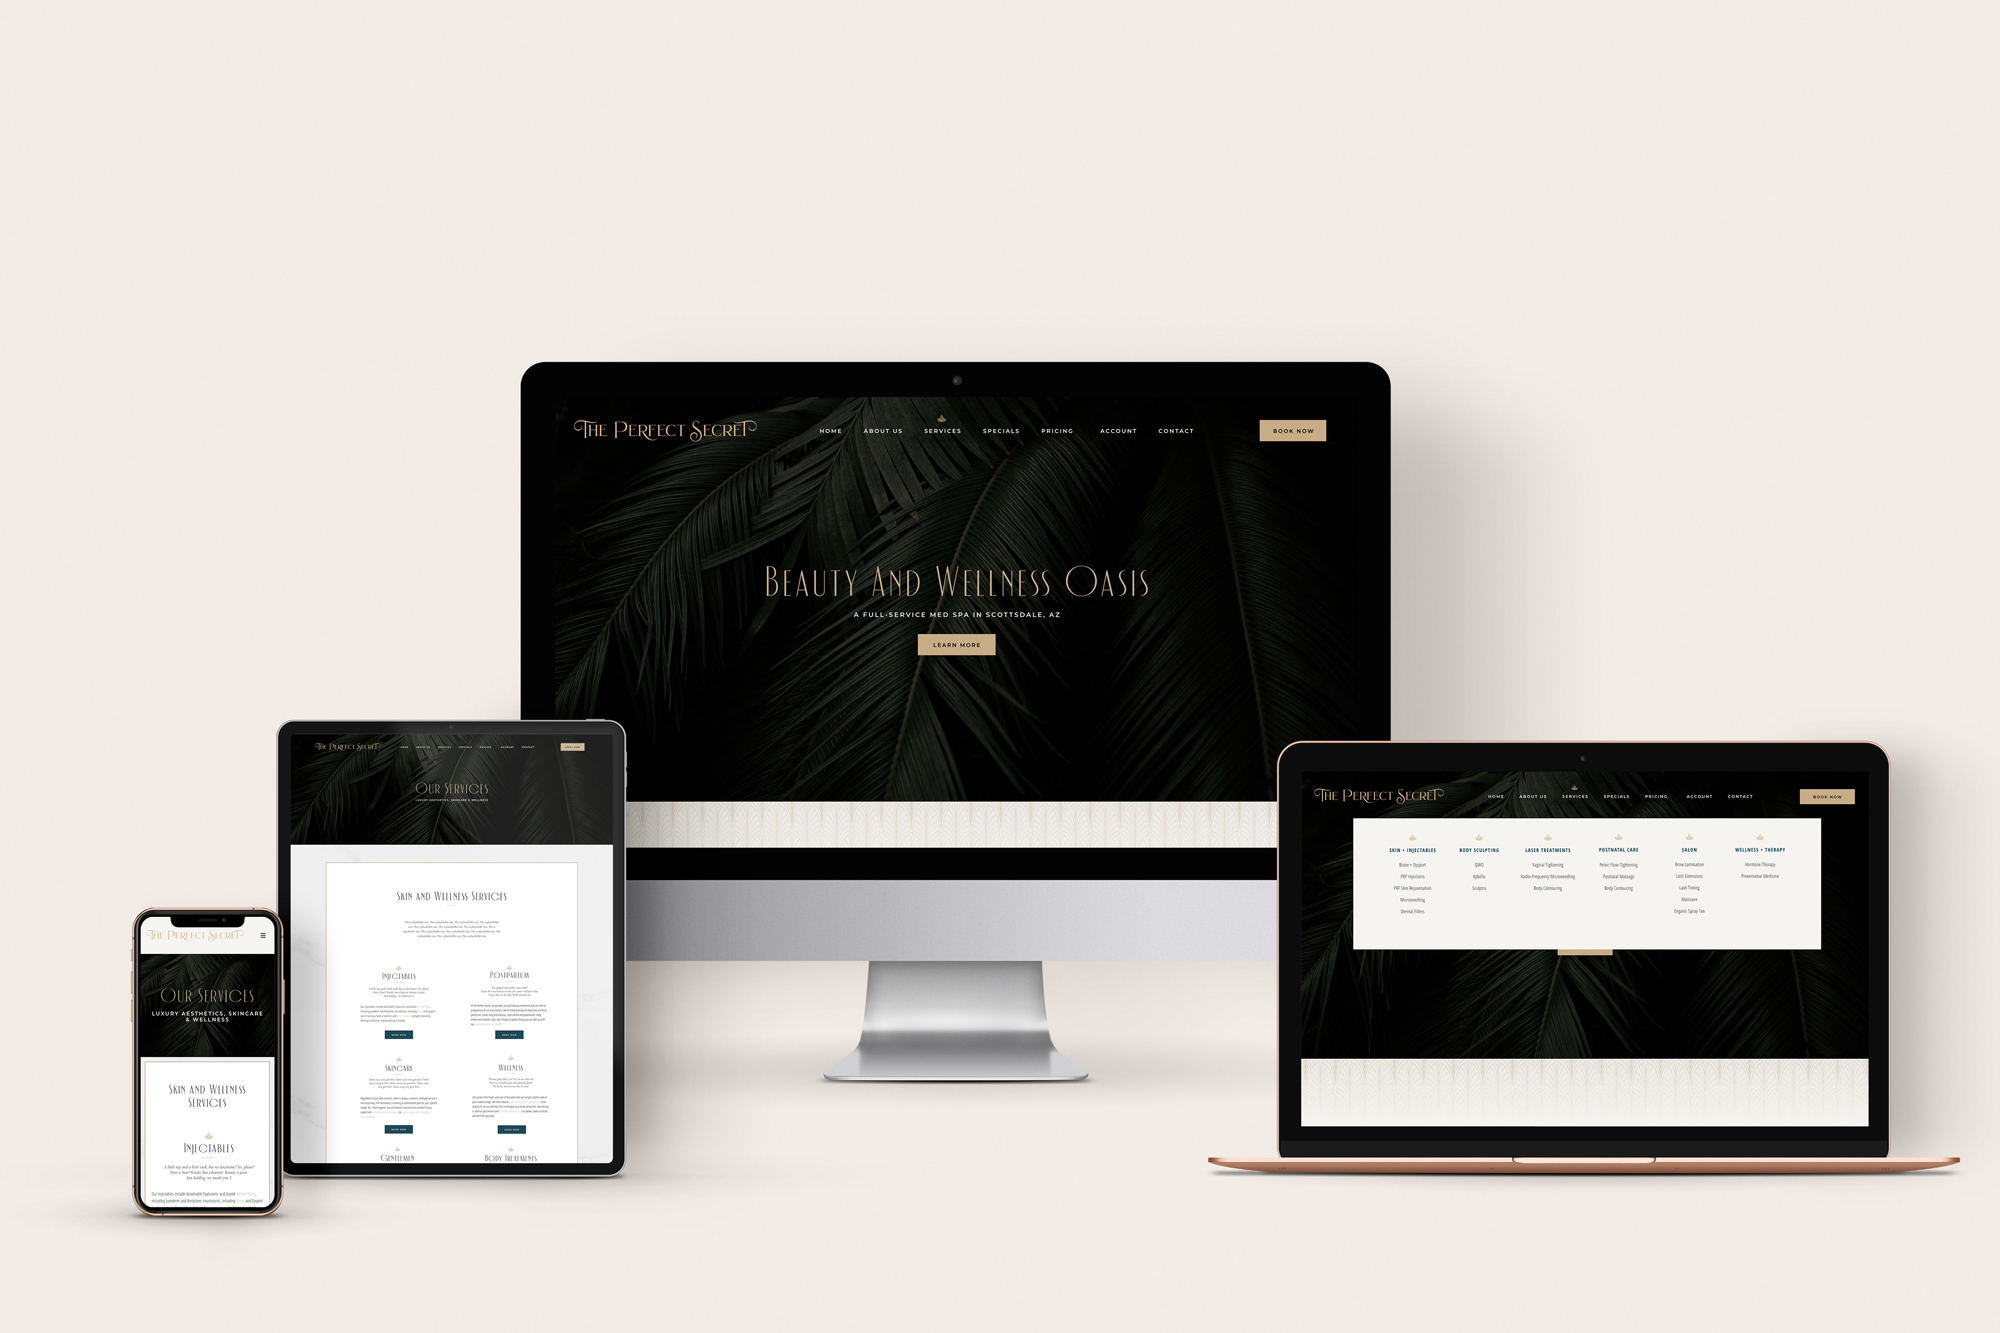 iMac, MacBook, iPad and iPhone mockups for the website design of It's the Perfect Secret med spa